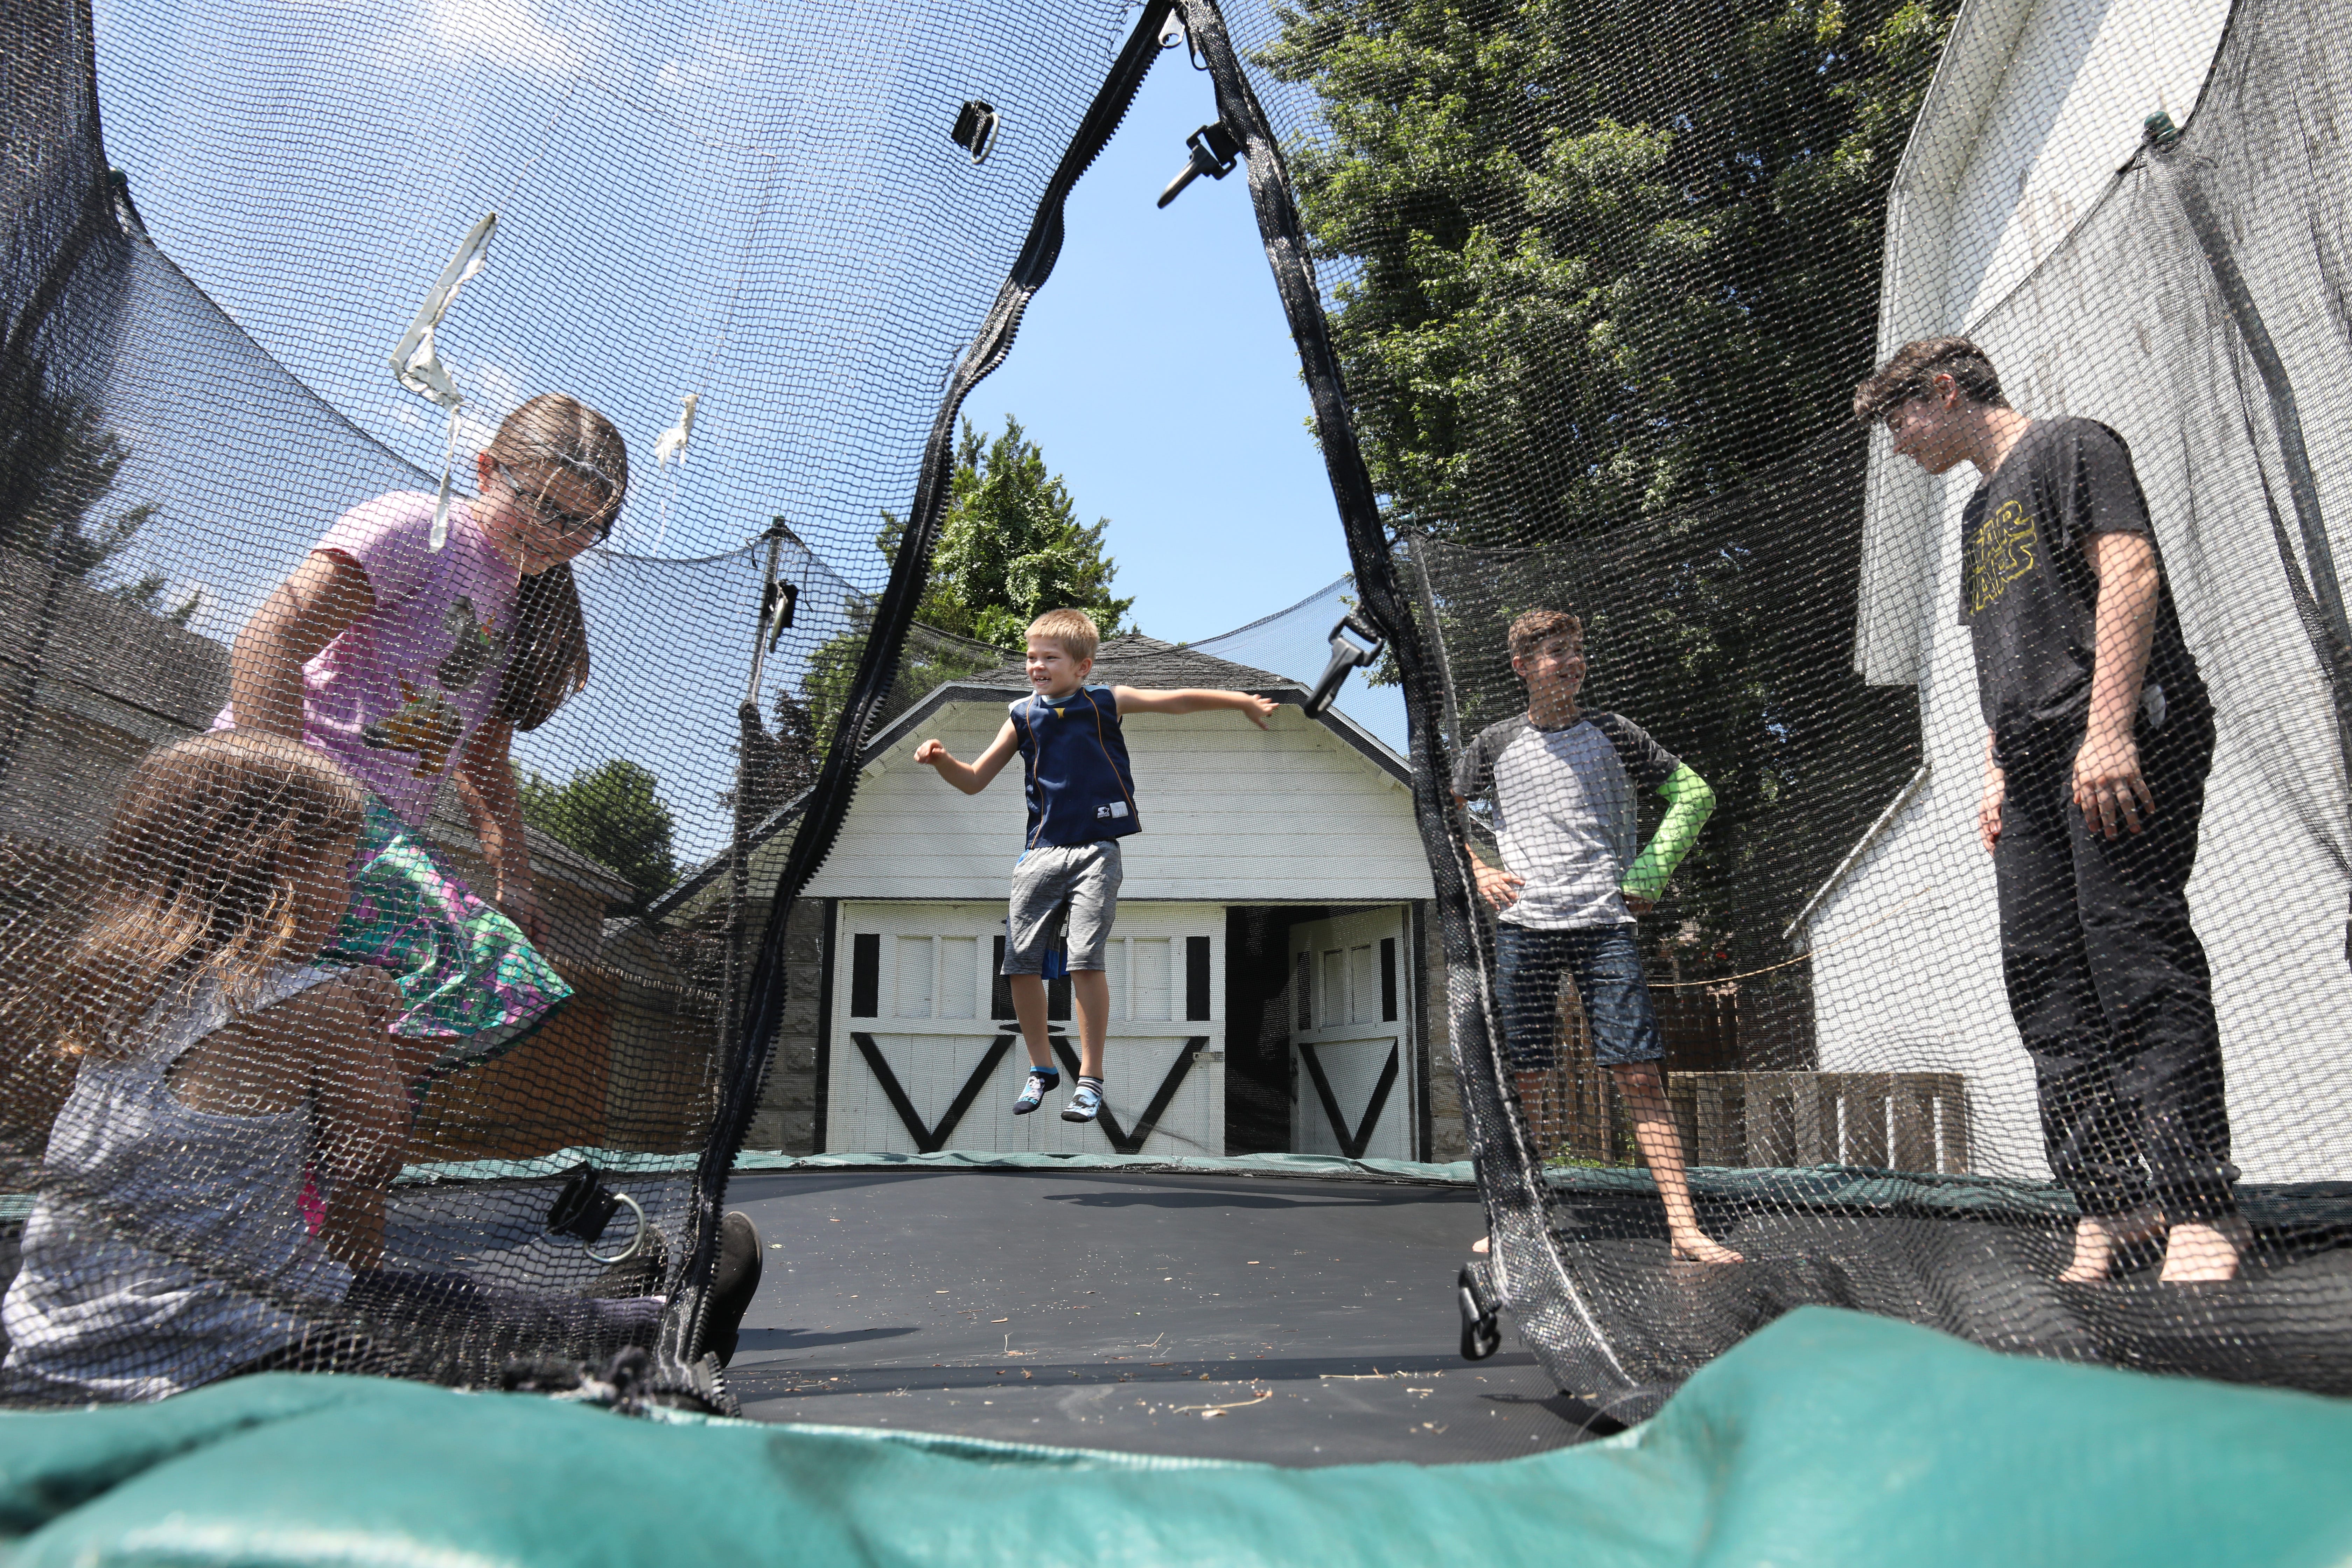 Bentley Niles, center, joins his sister Gabby, left, and his cousins as they play in the backyard where his father Josh Niles lived with girlfriend  Amber Washburn, Wednesday, July 3, 2019 in Sodus, NY.  Josh and Amber were murdered in the same back yard by Tim Dean, the boyfriend of the boy's mother, Charlene Childers.  